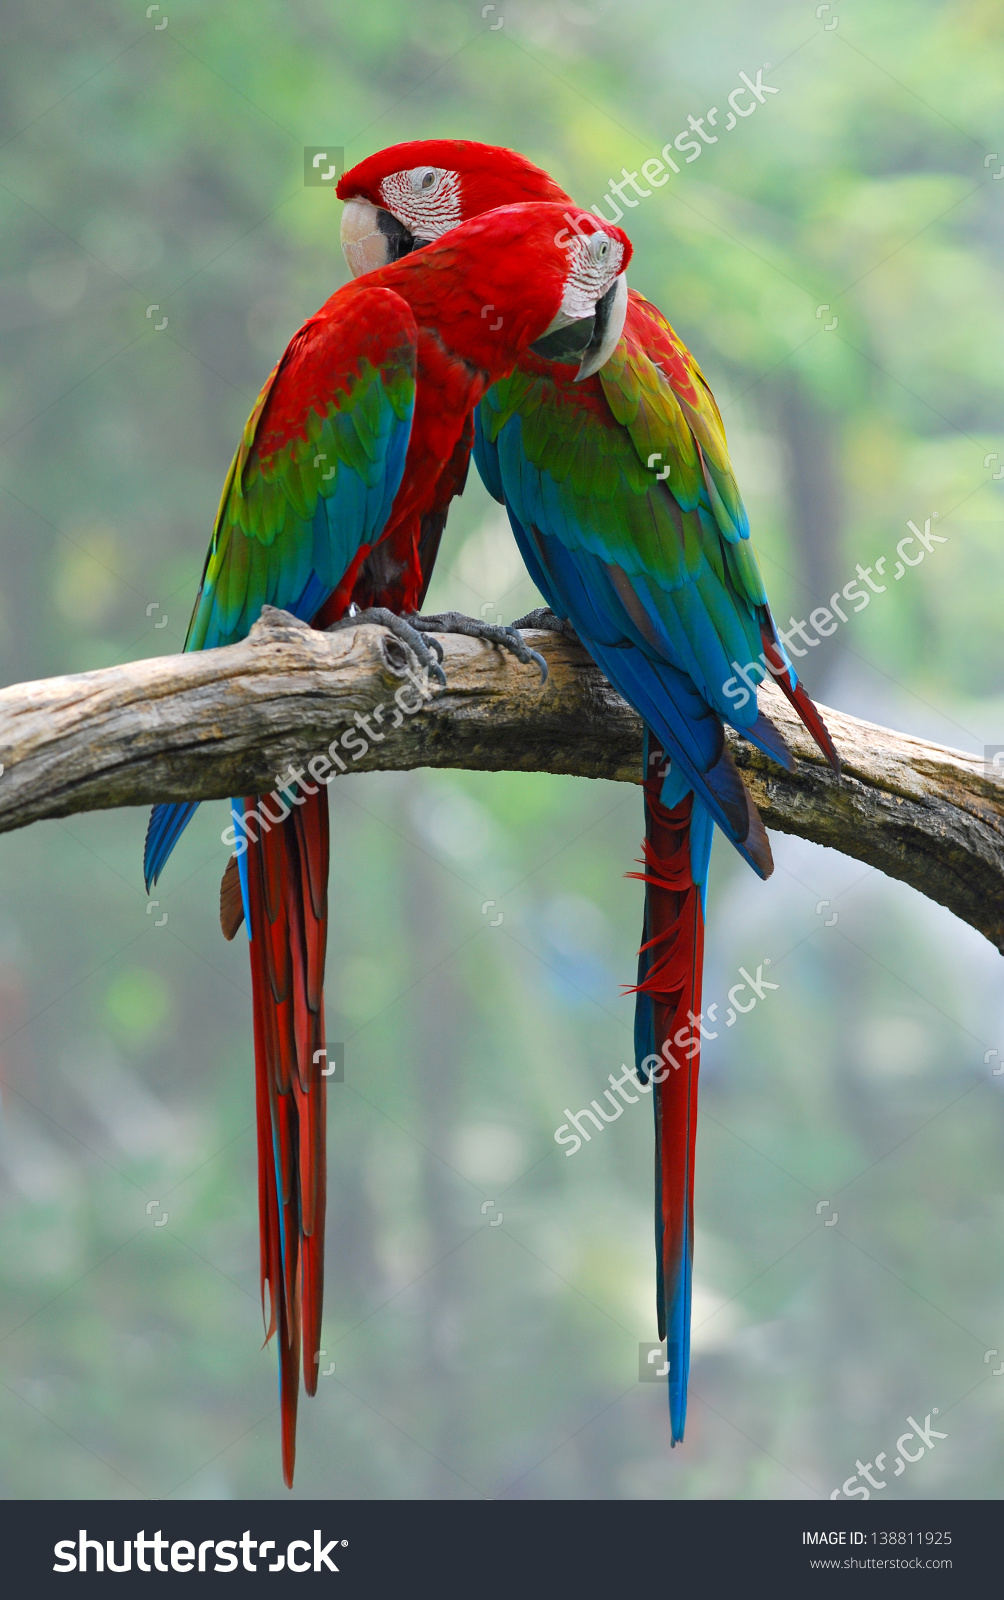 Red-and-green Macaw #7